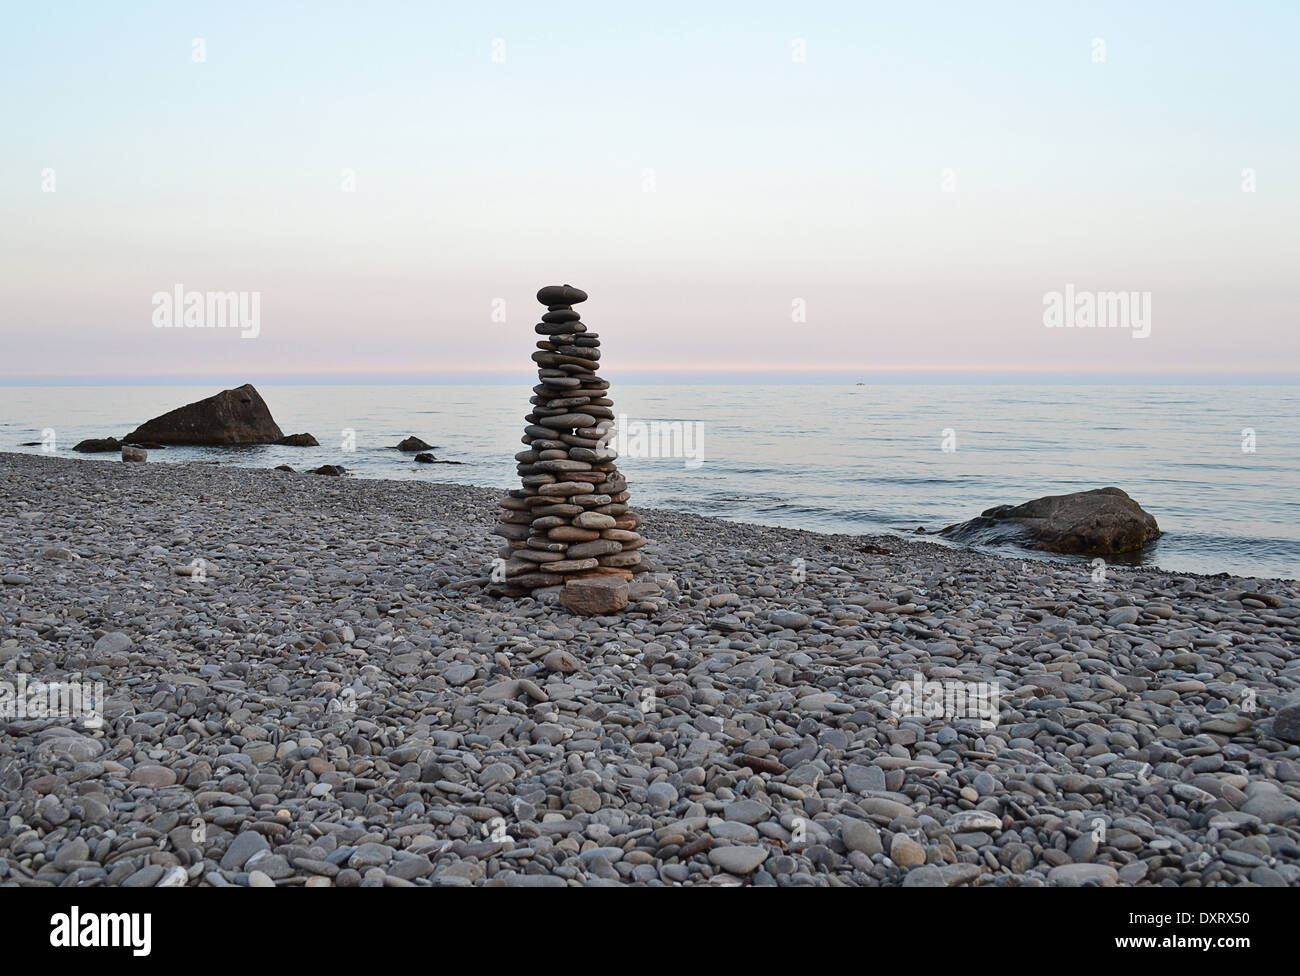 pyramid of stones on the beach during sunset Stock Photo